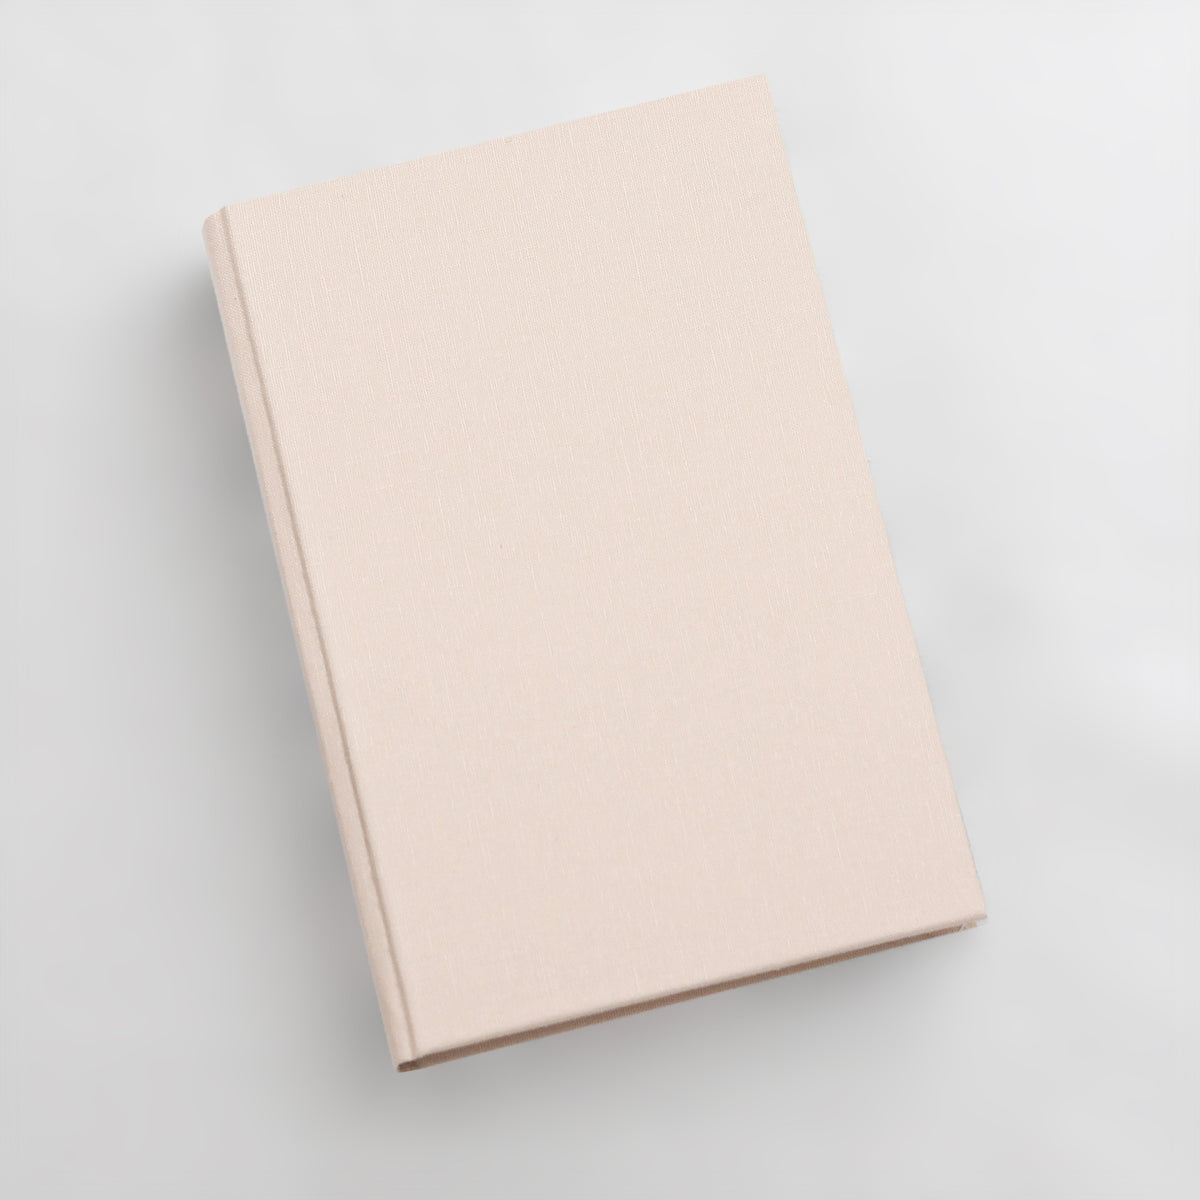 Medium 5.5x8.5 Blank Page Journal | Cover: Ballet Pink Cotton | Available Personalized